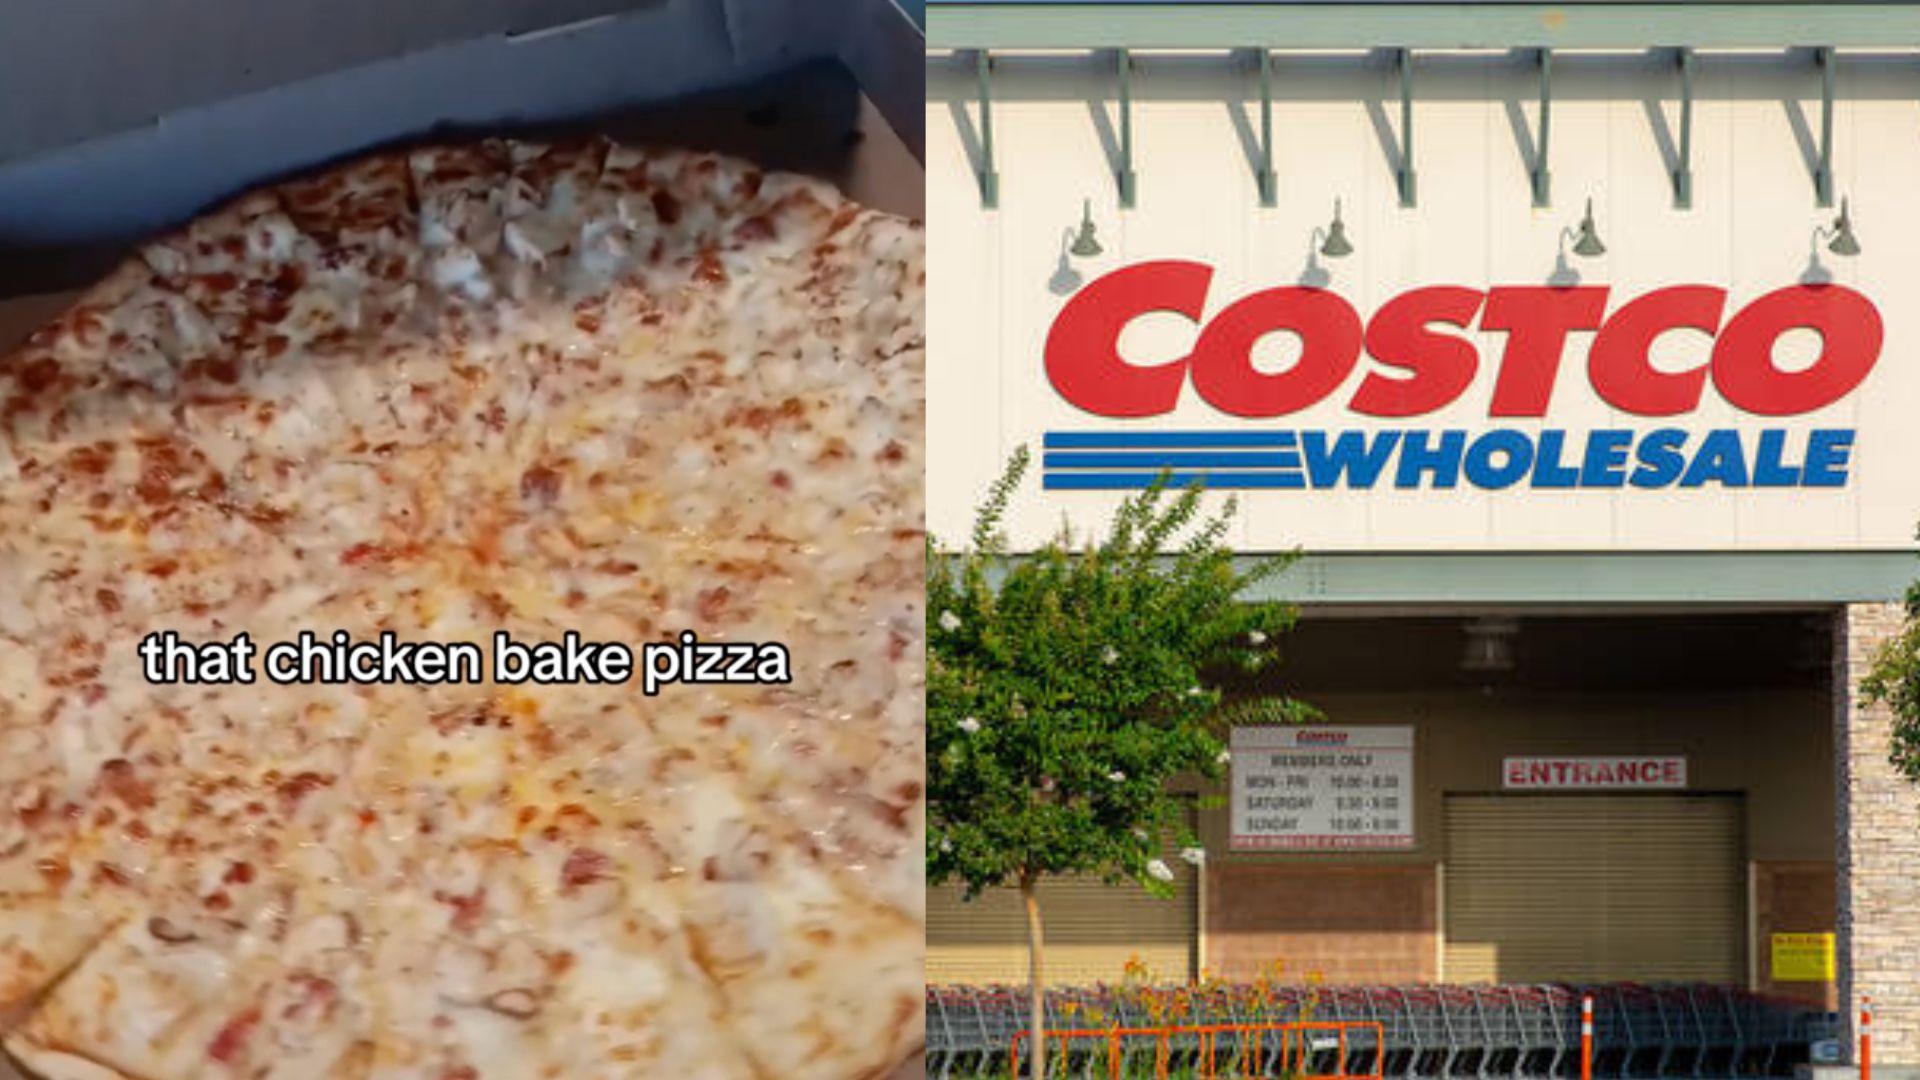 Costco storefront and pizza